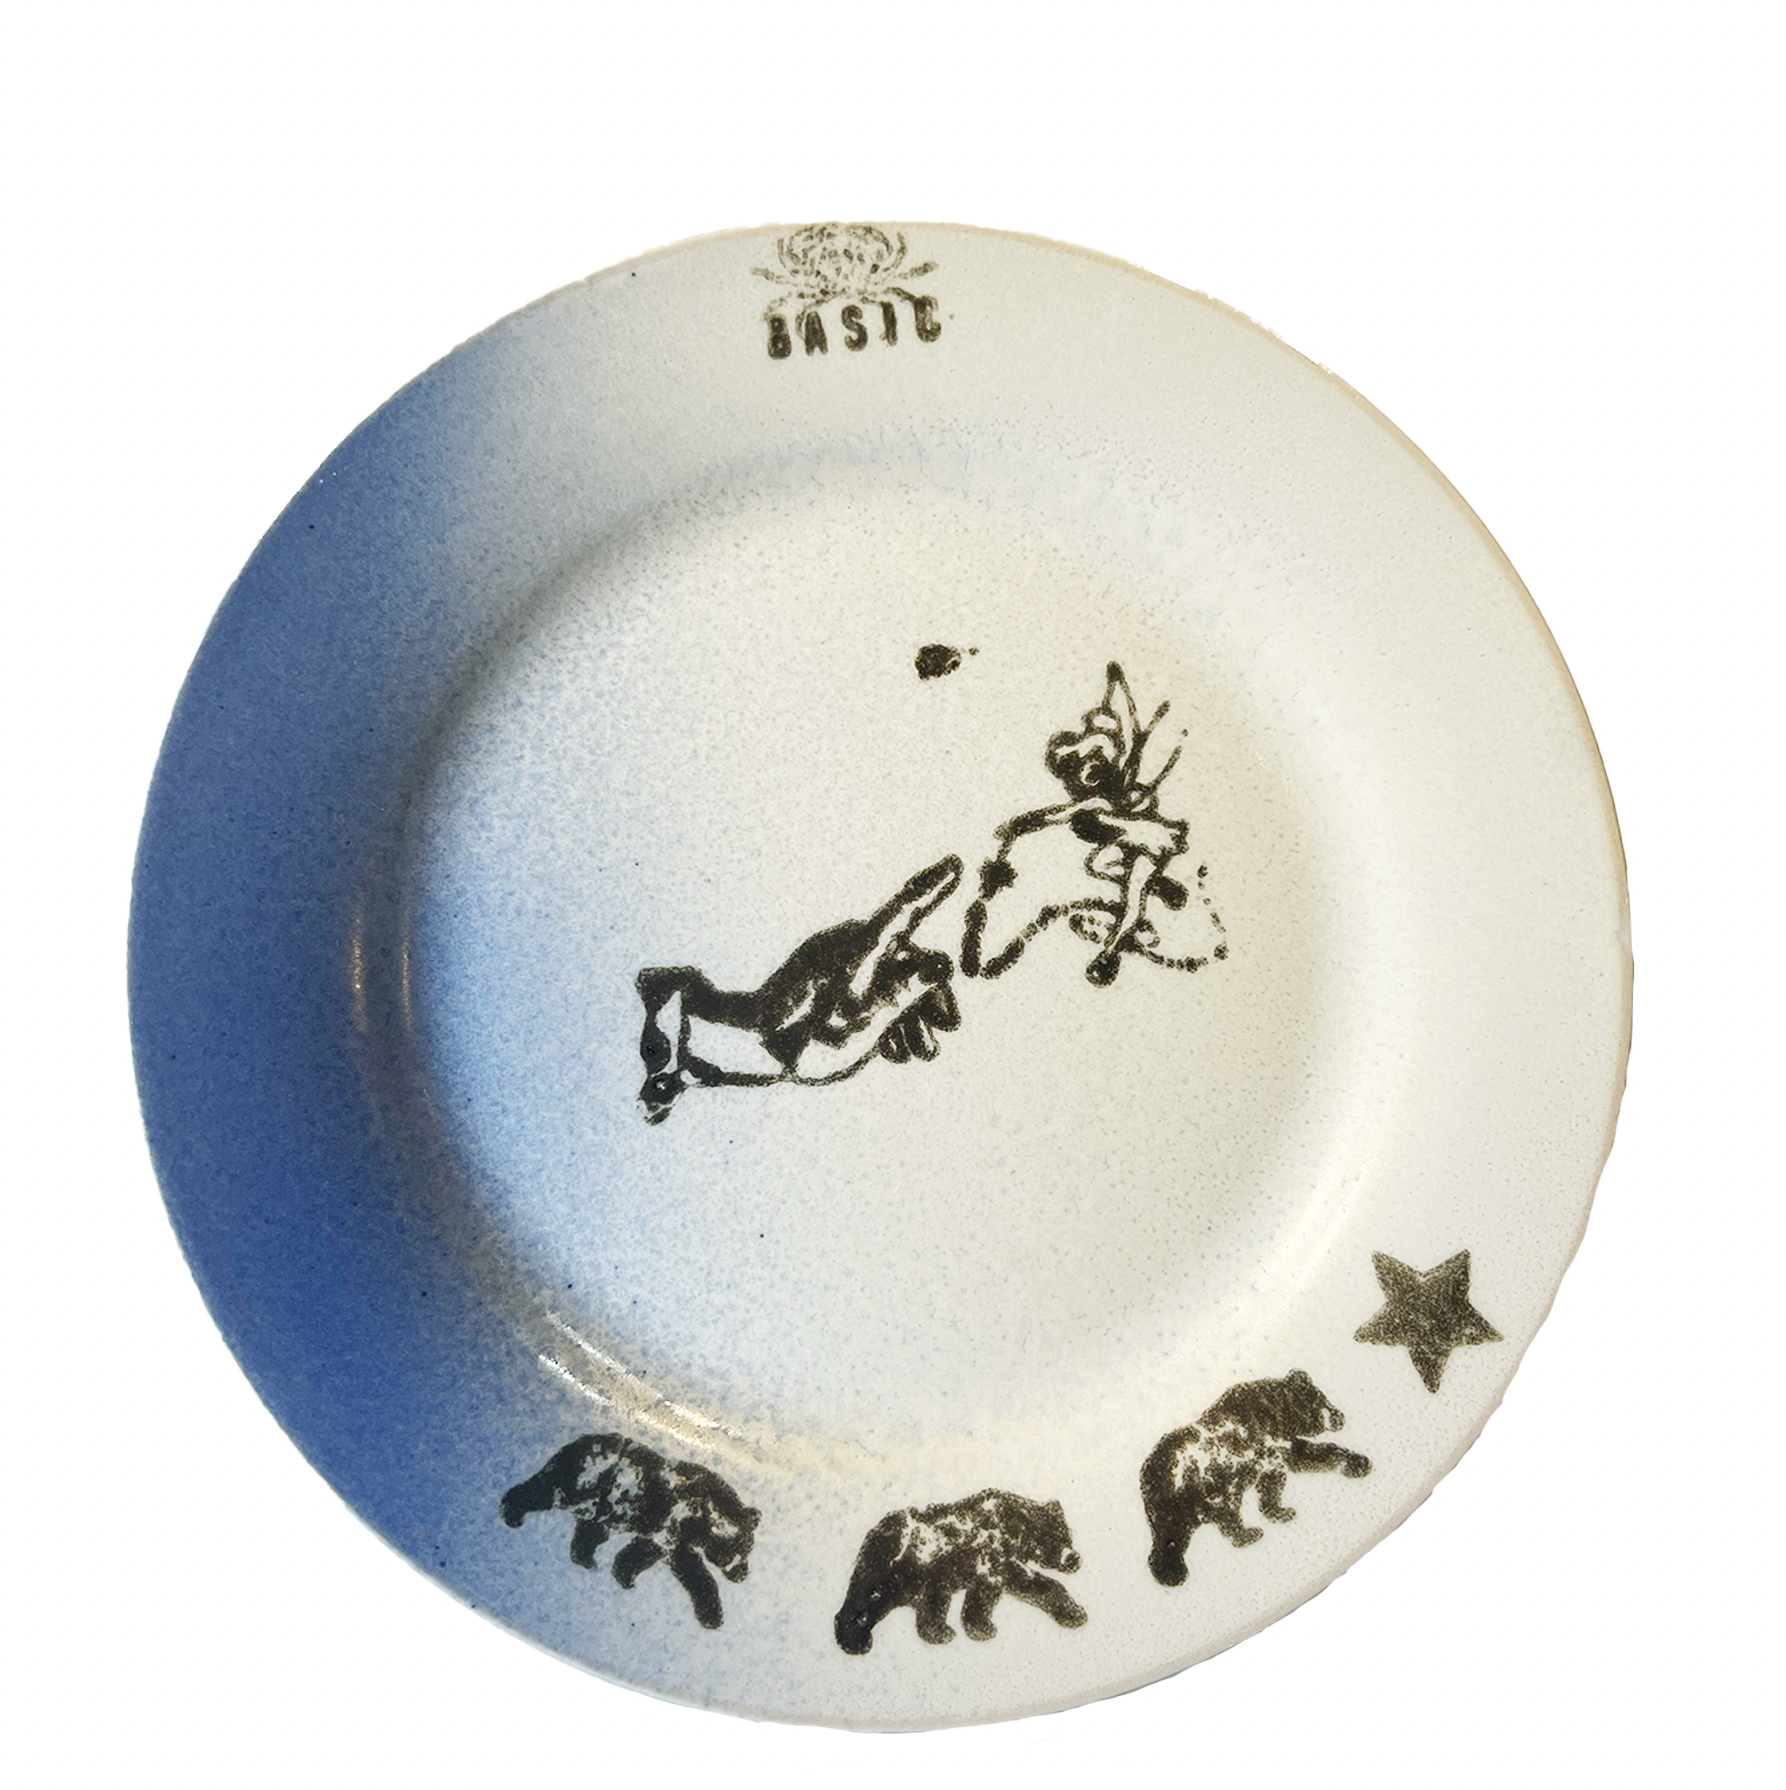 Casey O'Connor, One of One Ceramic Plates